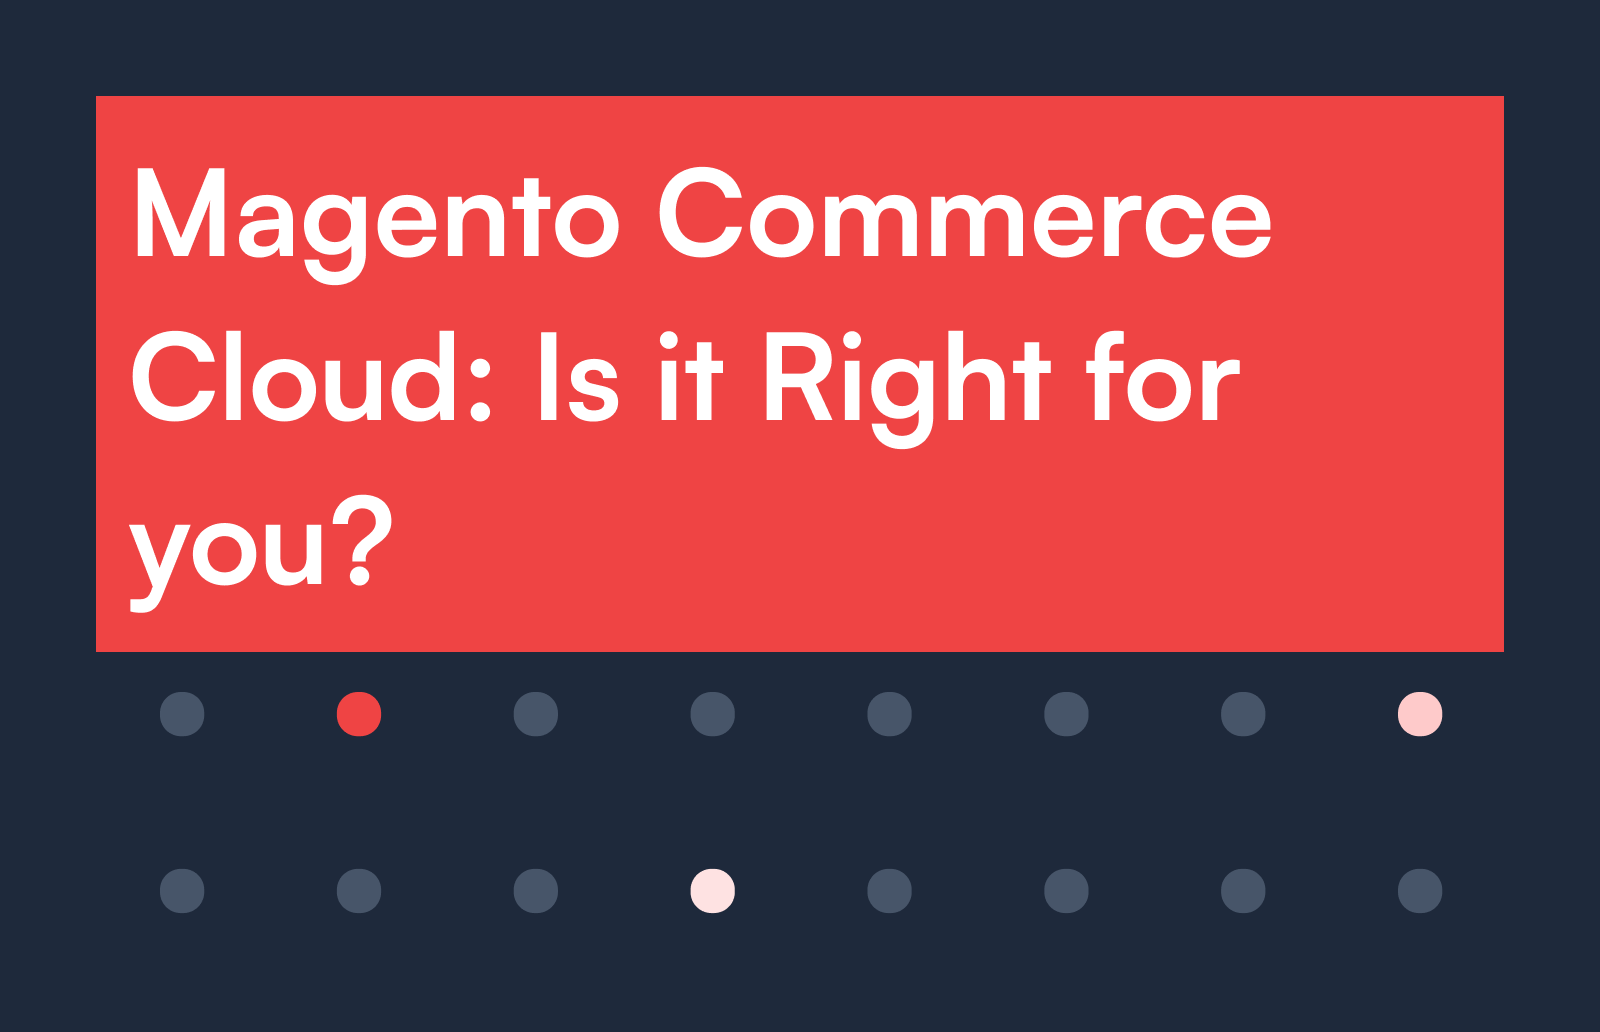 Magento Commerce Cloud: Is it Right for you?